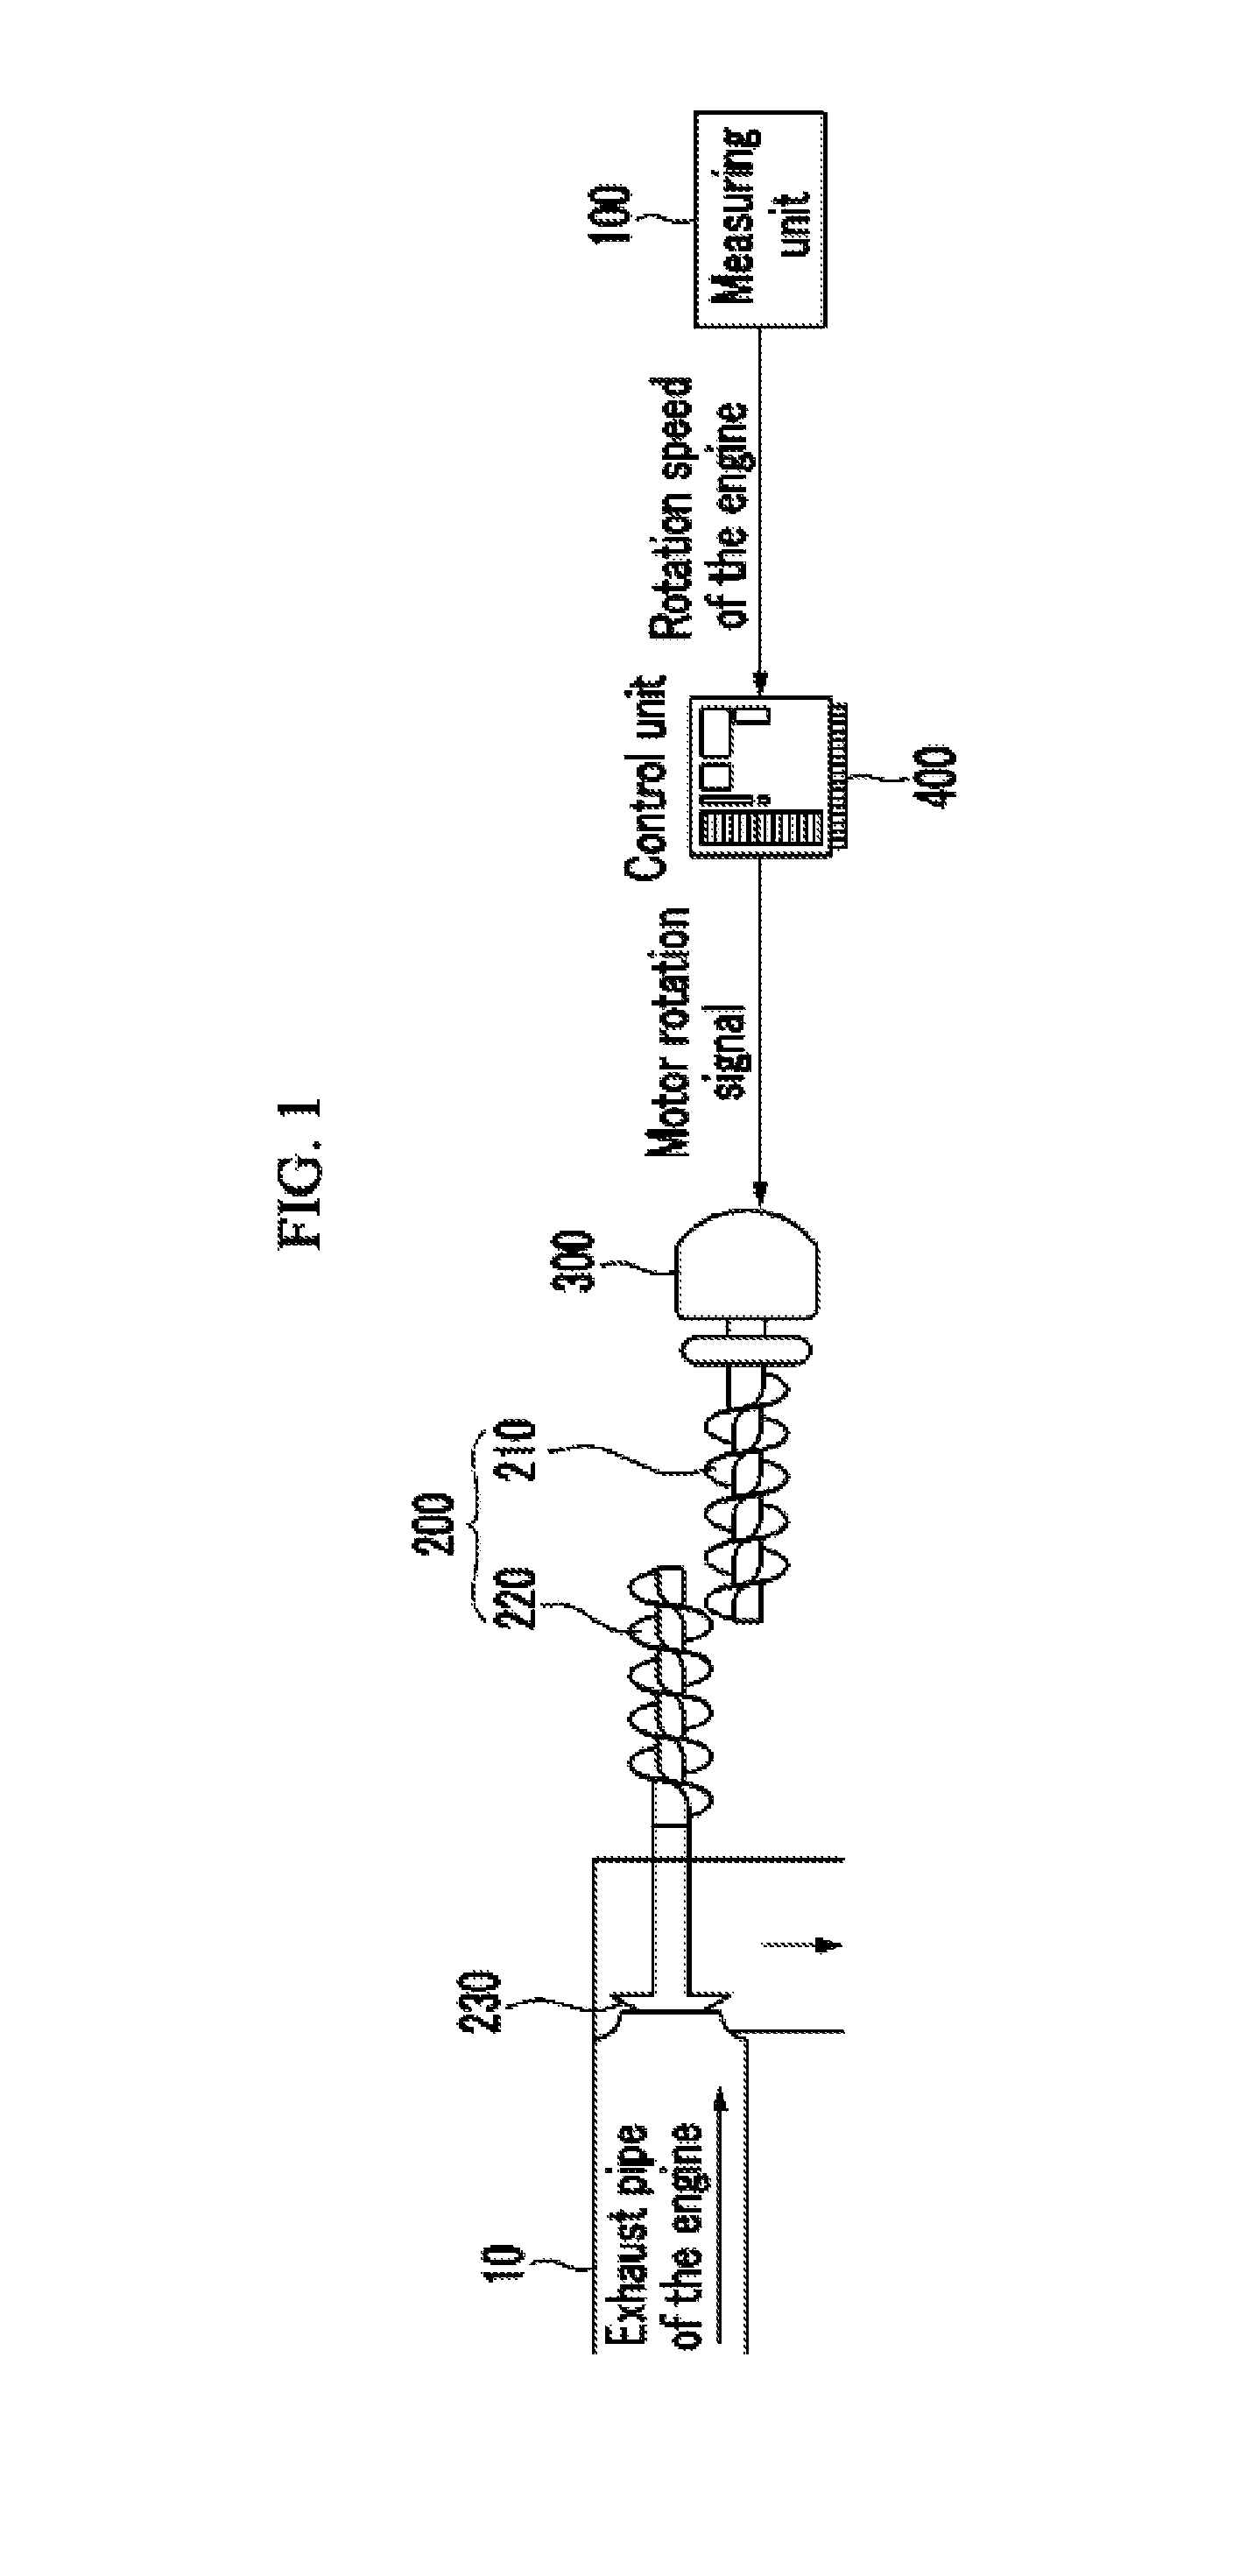 System and method for controlling an exhaust brake of a vehicle